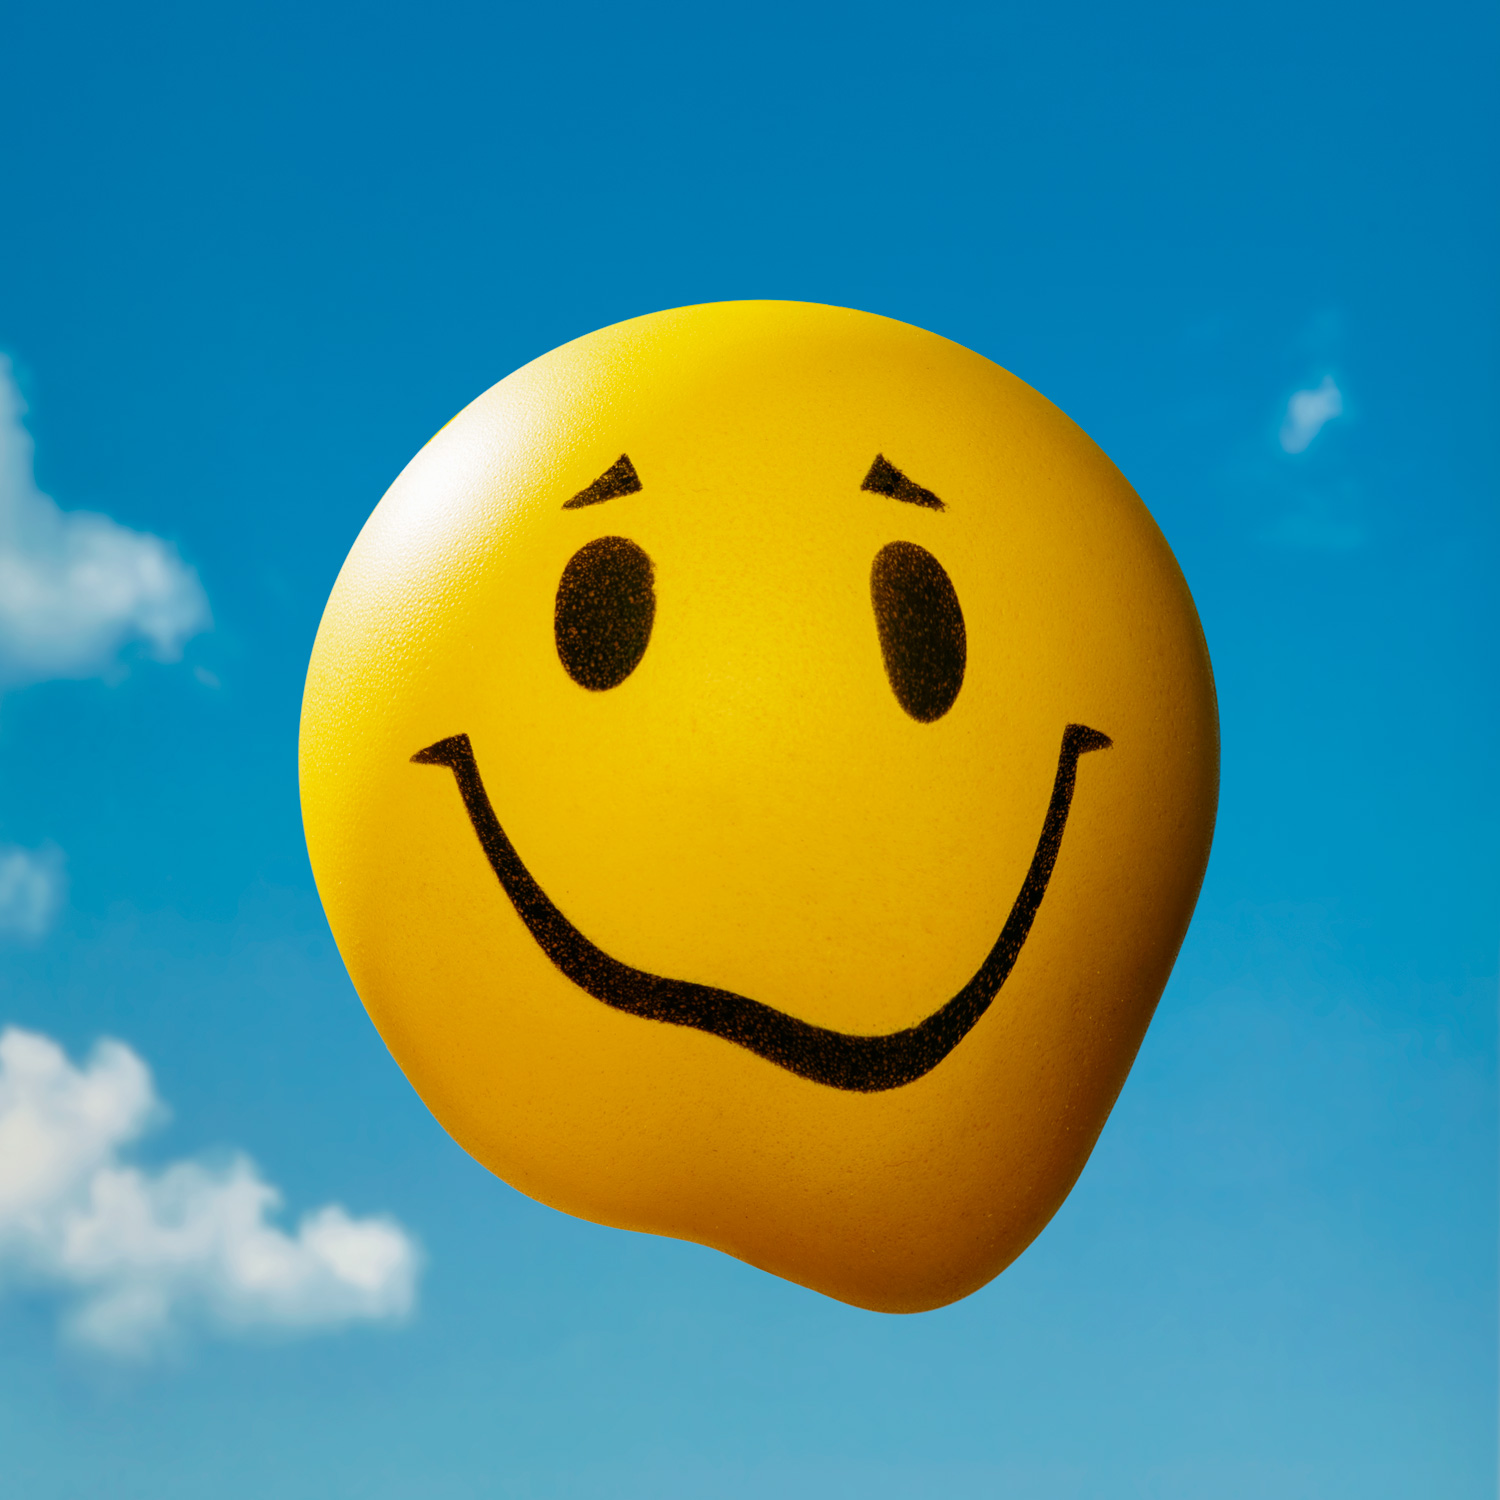 An illustration of a smiling face